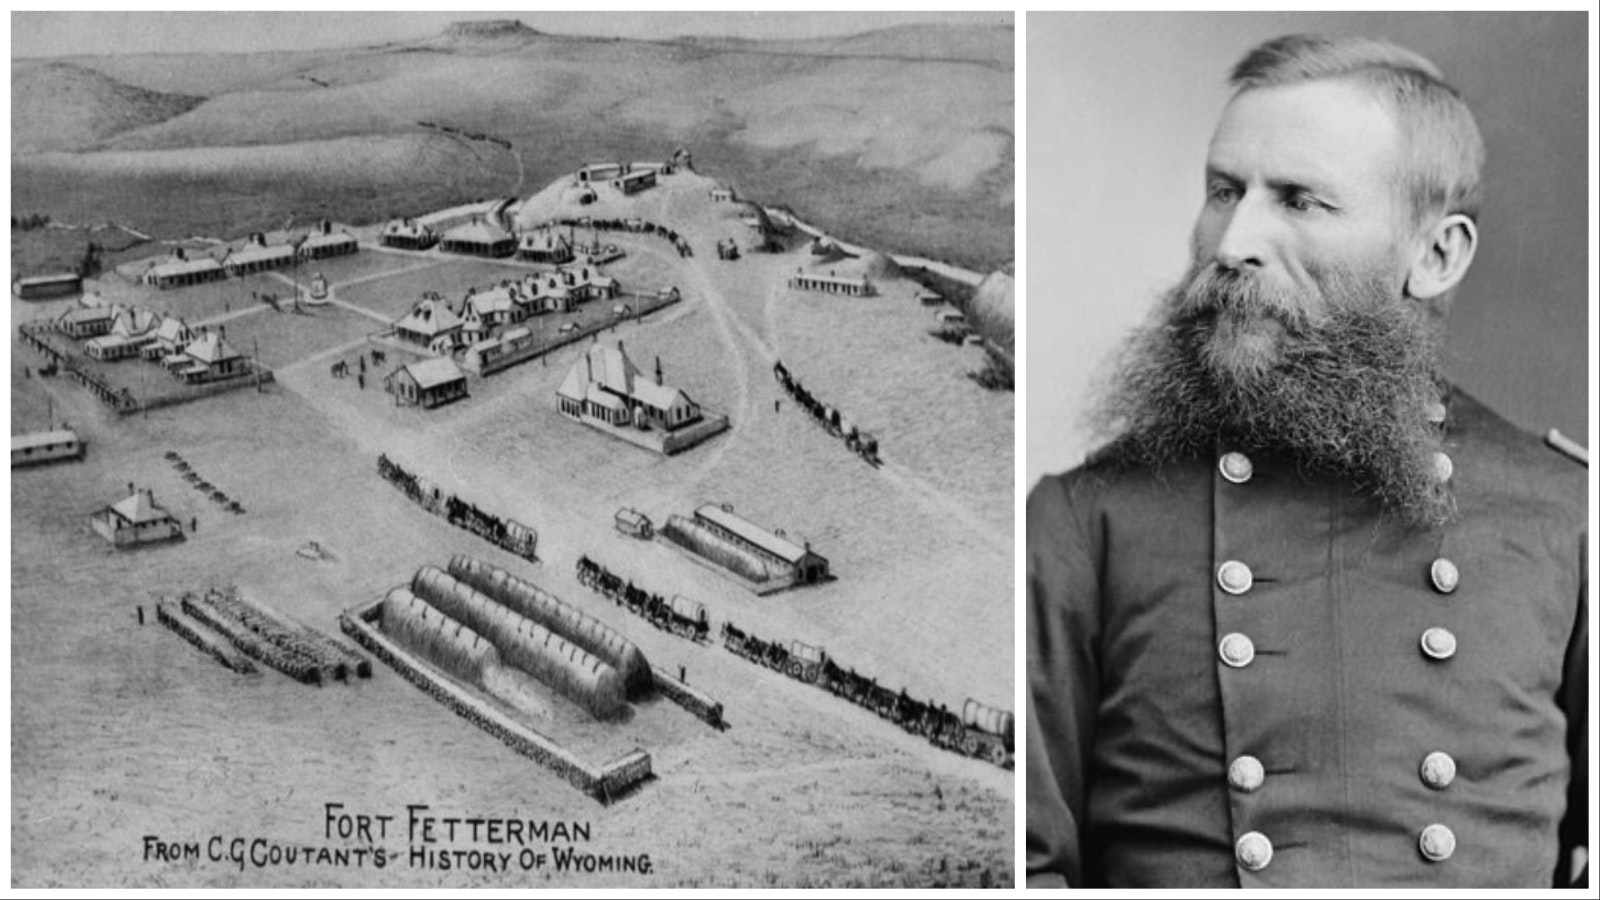 Left: A drawing depicting activity at Fort Fetterman. The fort, built in 1867, served as the launching point for a large U.S. Army contingent sent to bring Native Americans onto their reservations in 1876. Right: General George Crook was an experienced soldier who served in the Civil War and then in the southwest fighting Apache warriors, before coming north to the Department of the Platte.